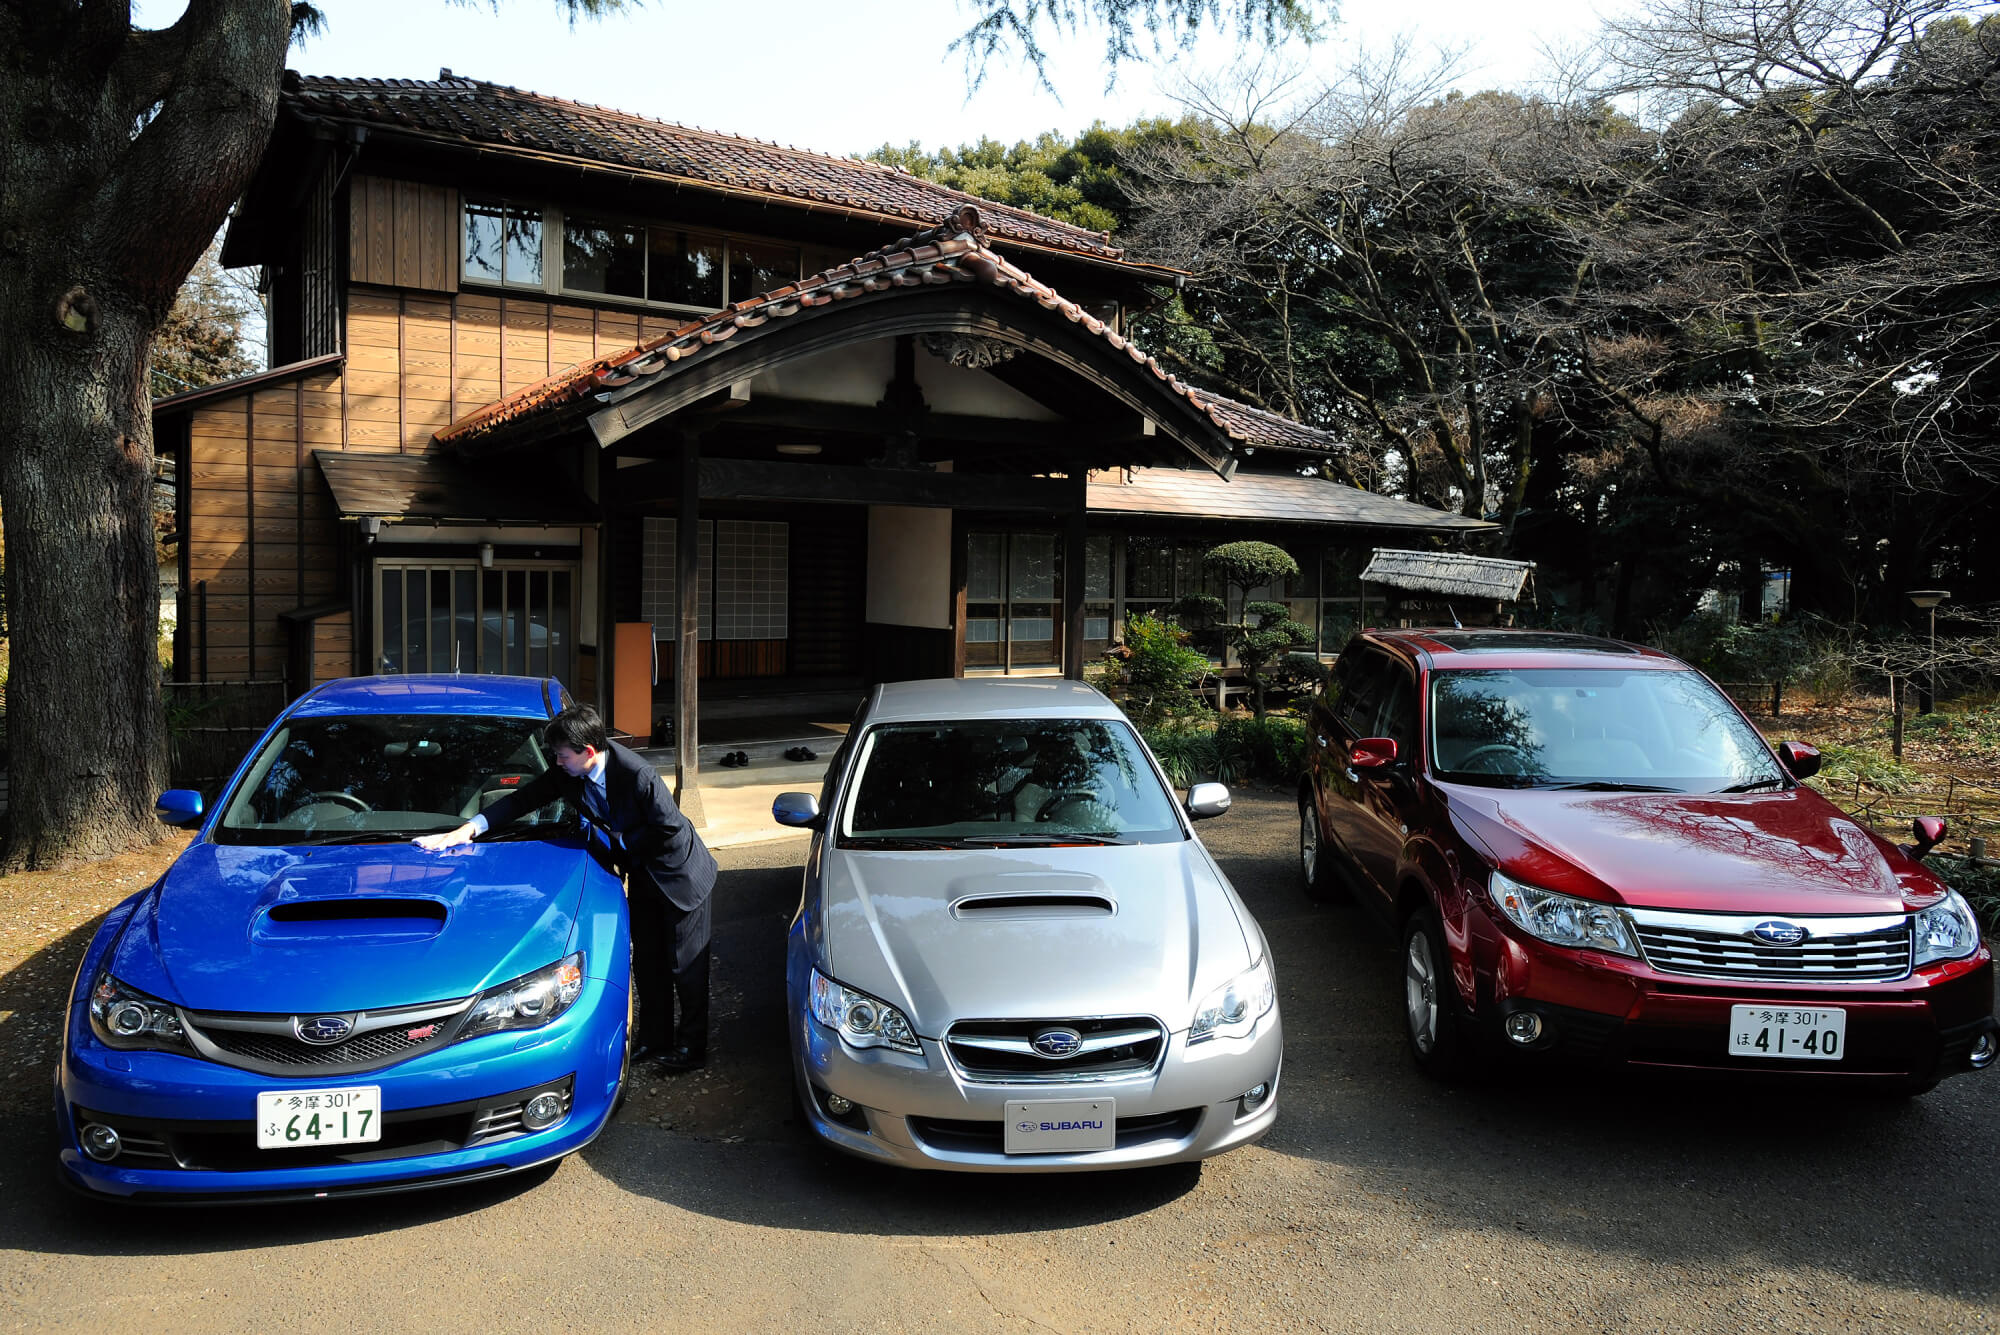 A group of 2000s Subaru models parked in front of a house.